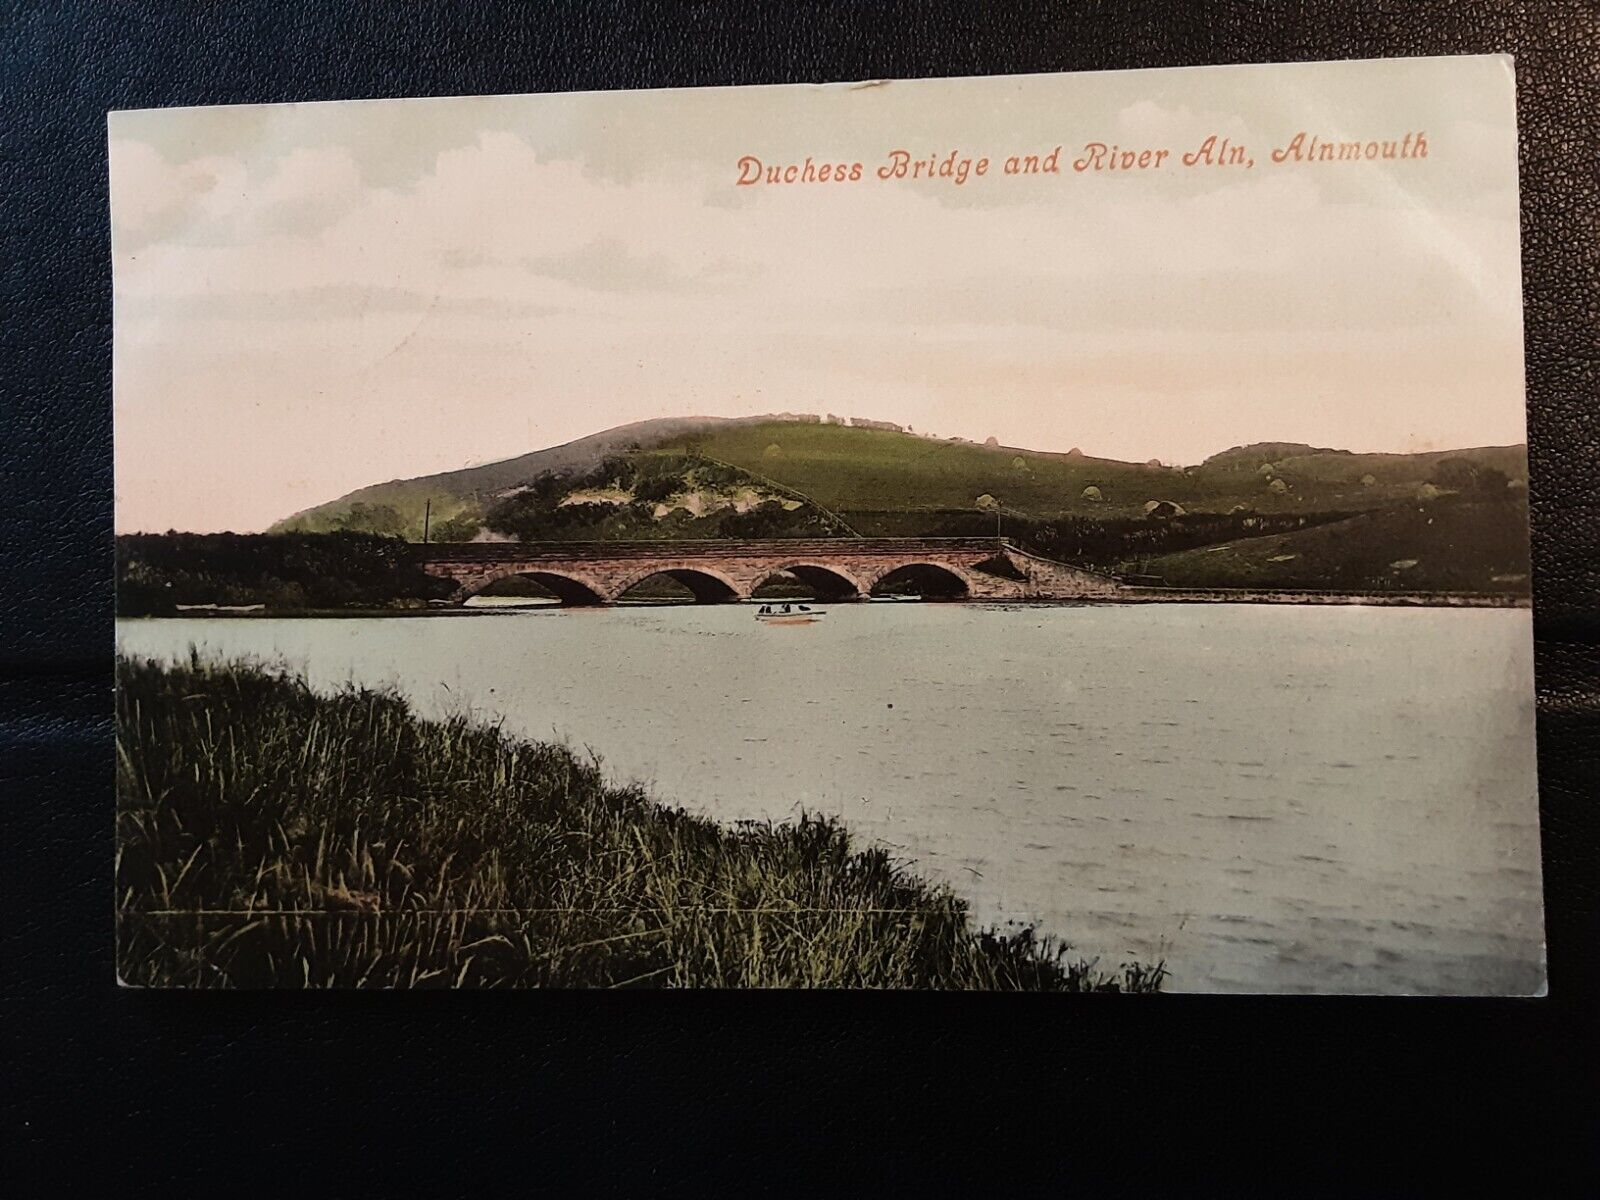 House Clearance - Old W Stephenson service of Duchess Bridge Alnmouth, Northumberland posted 190?